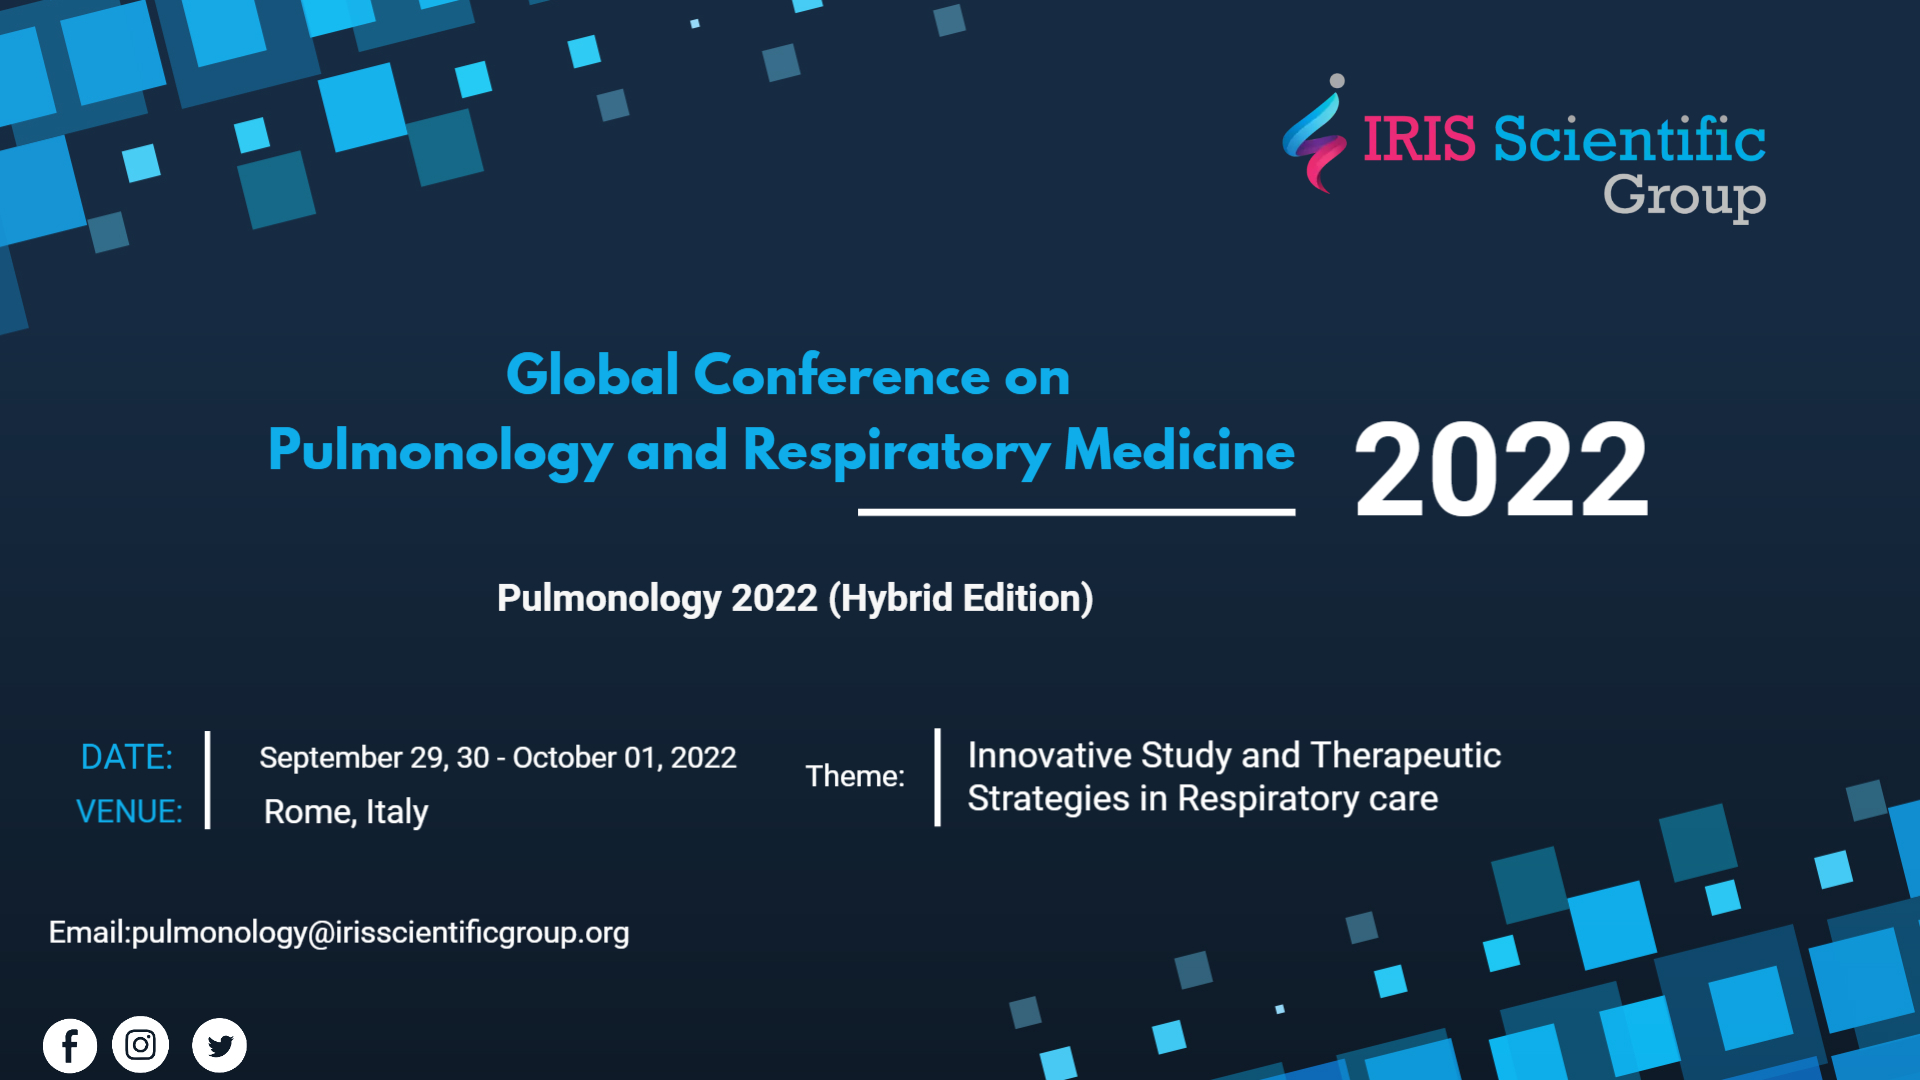 Global Conference on Pulmonology and Respiratory Medicine [Hybrid Edition], Rome, Italy